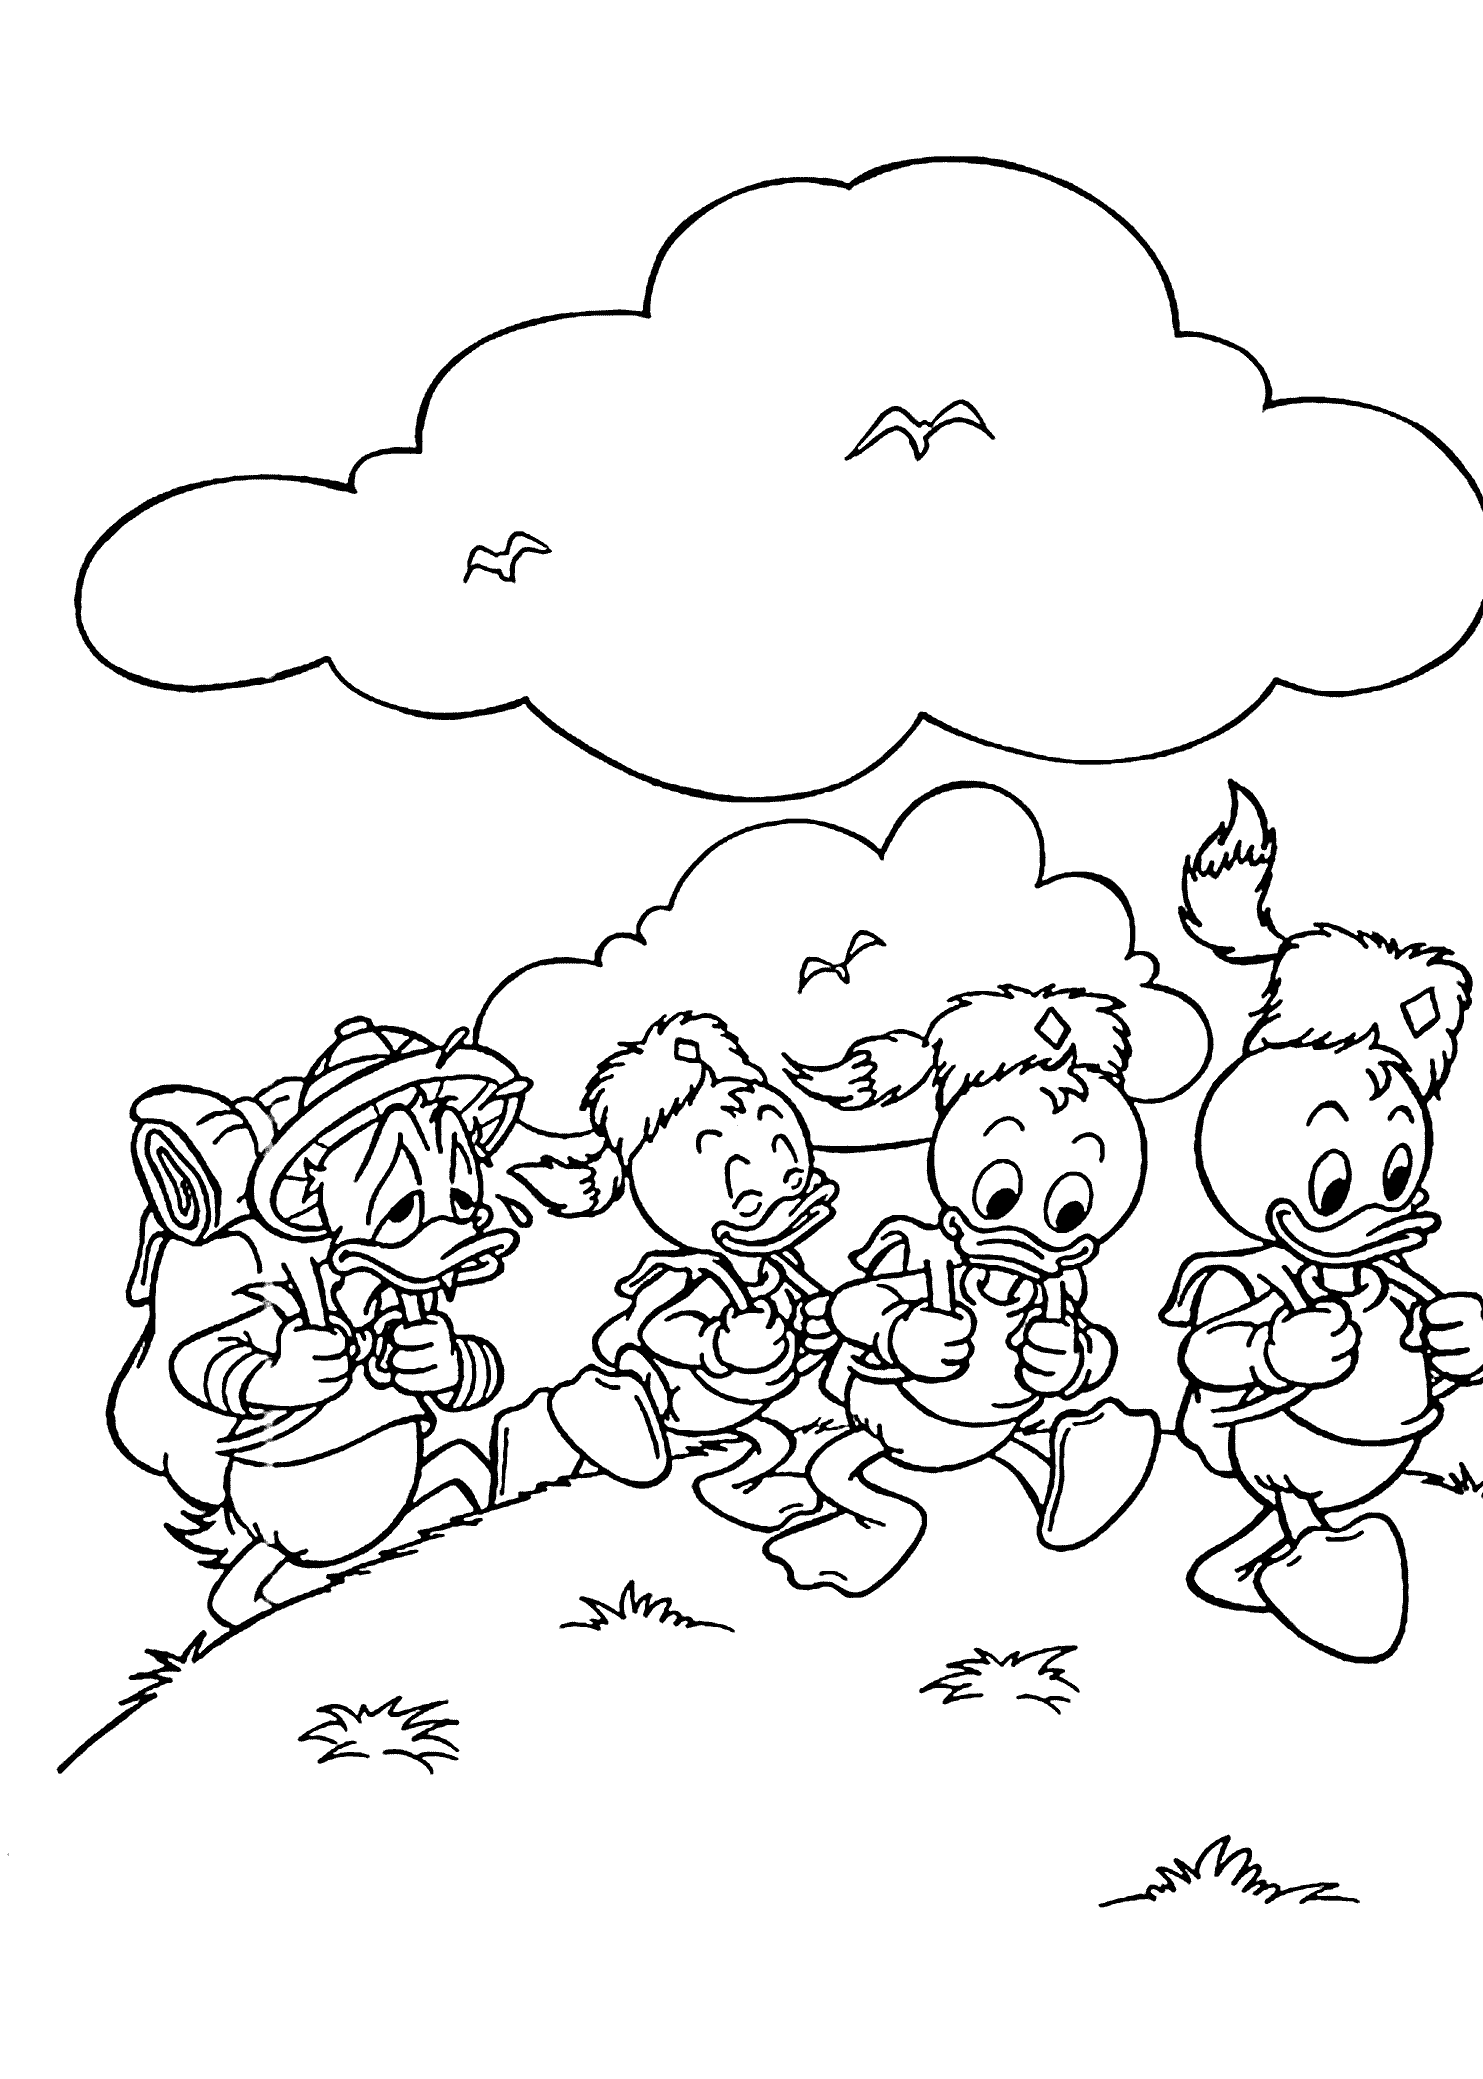 Scrooge Mcduck Coloring Pages For Kids Printable Free Camping Coloring Pages Disney C